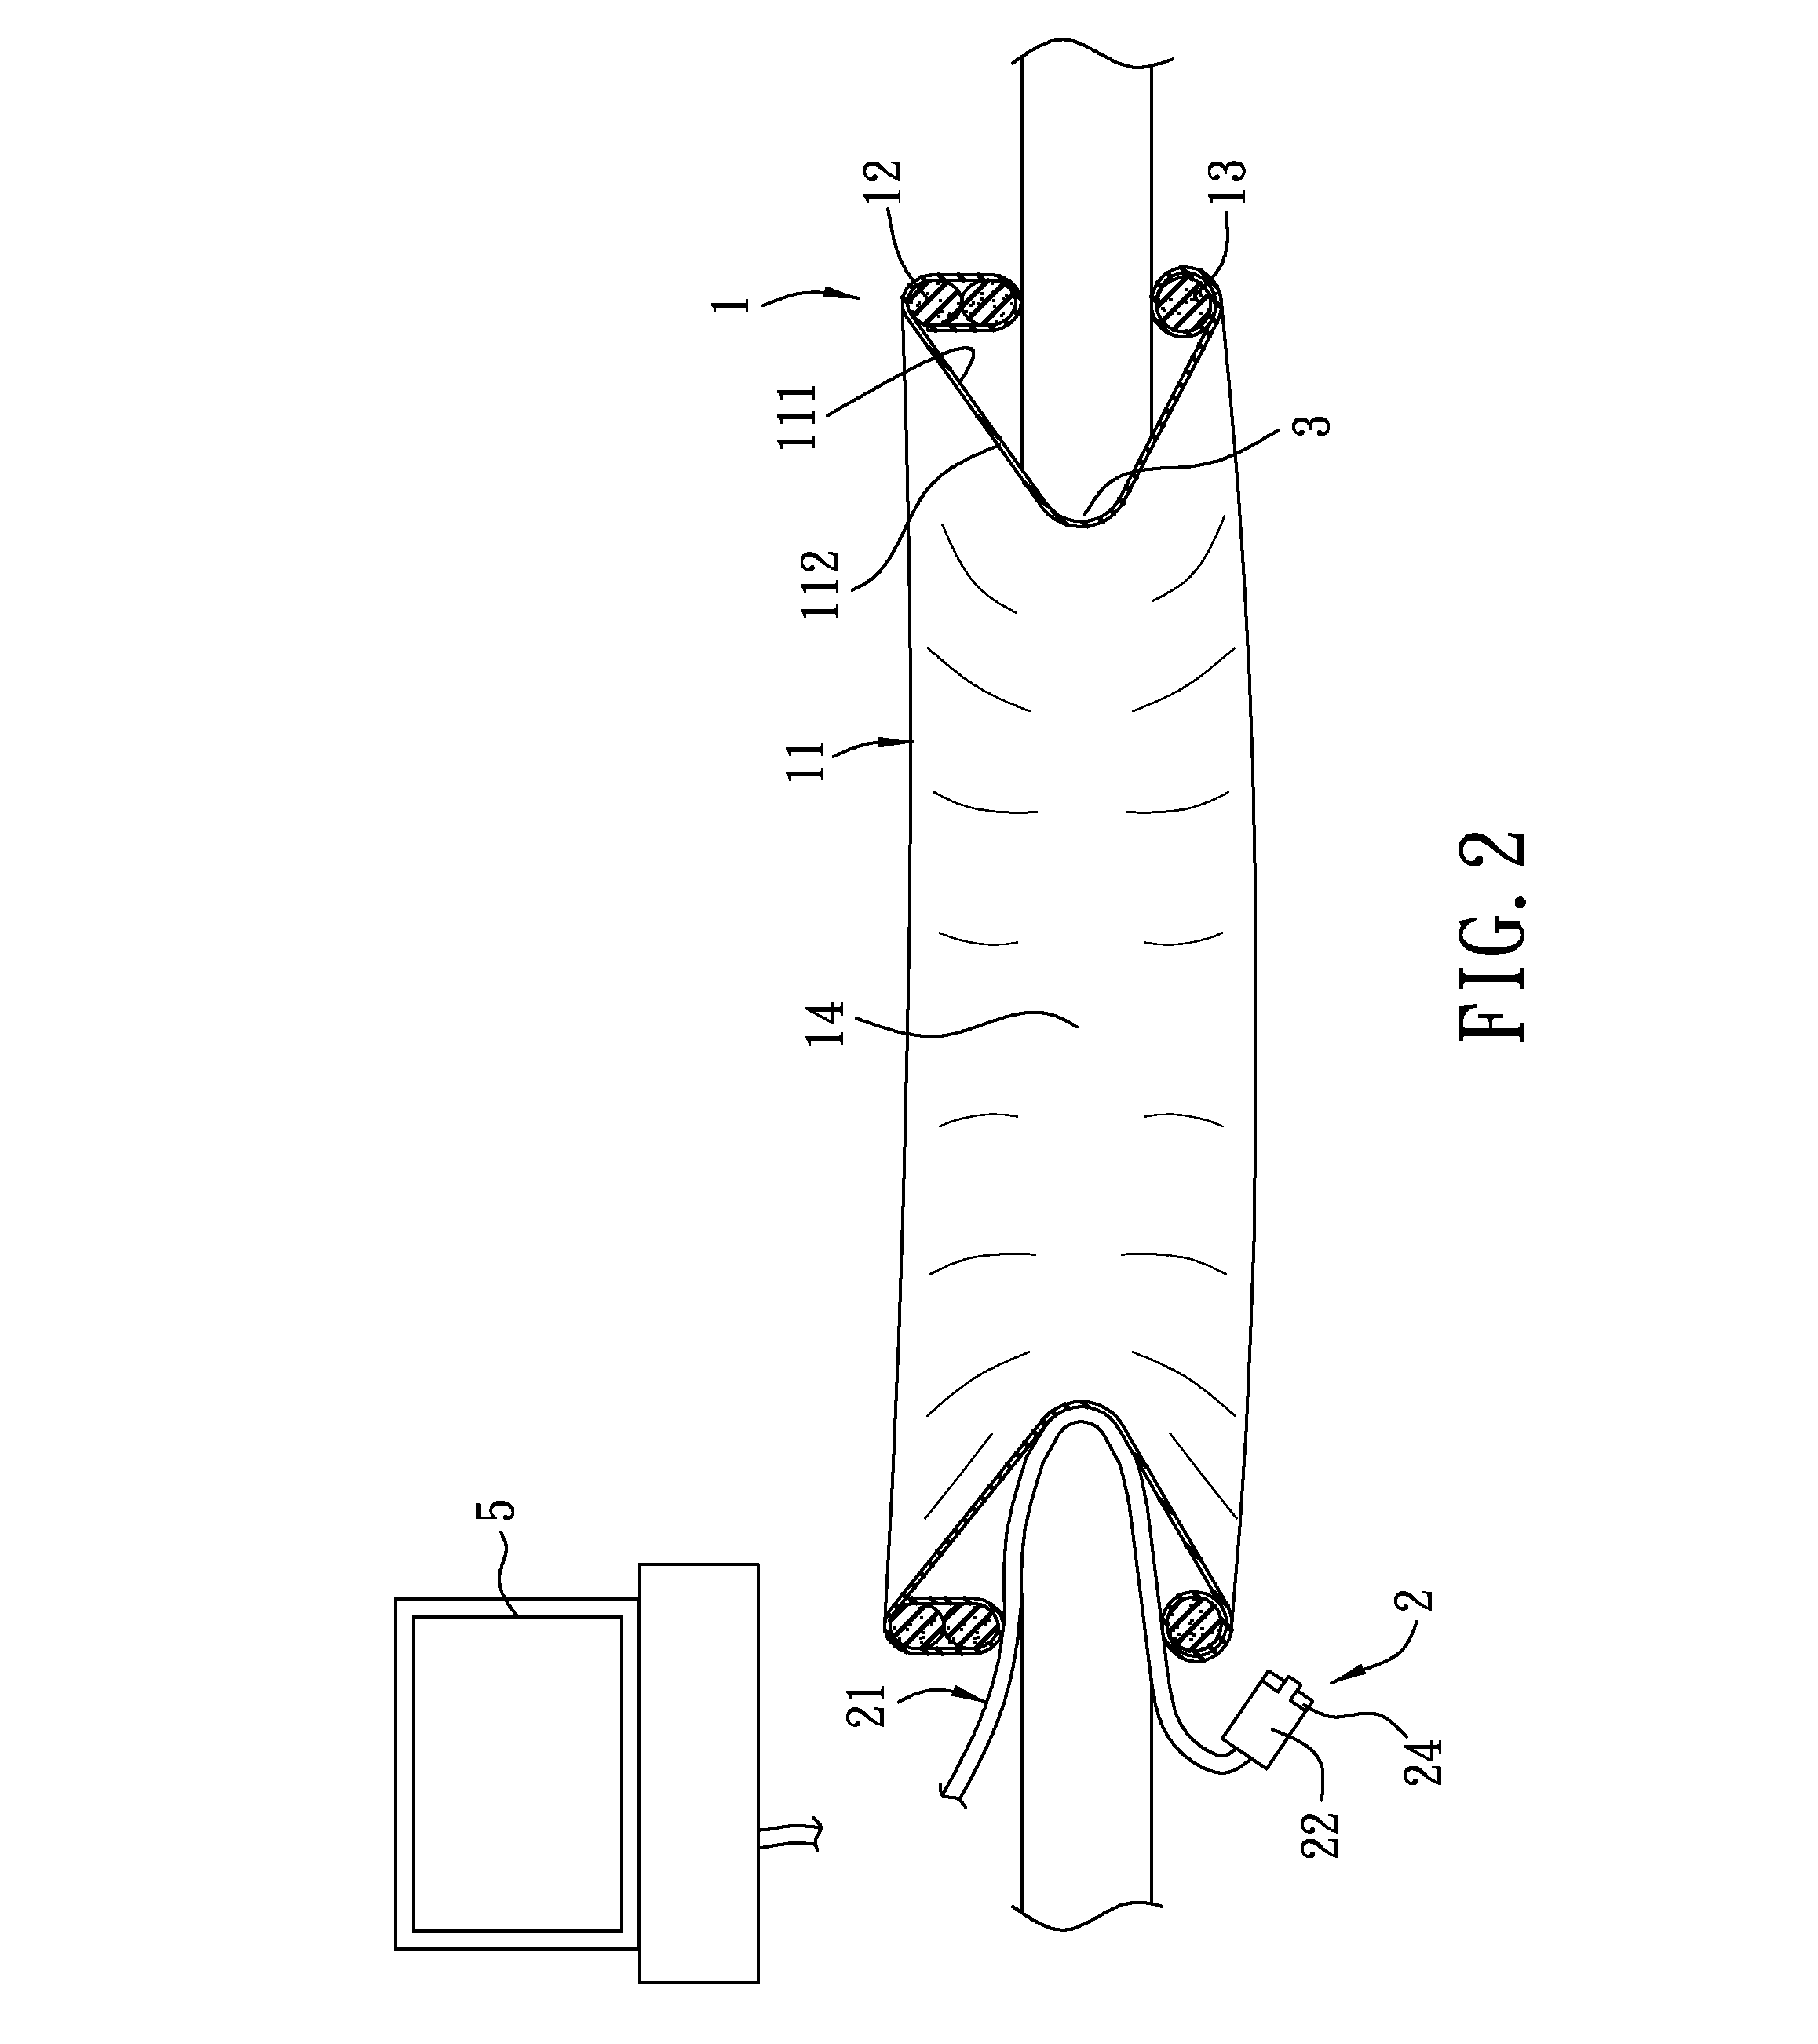 Combined retractor and endoscope system